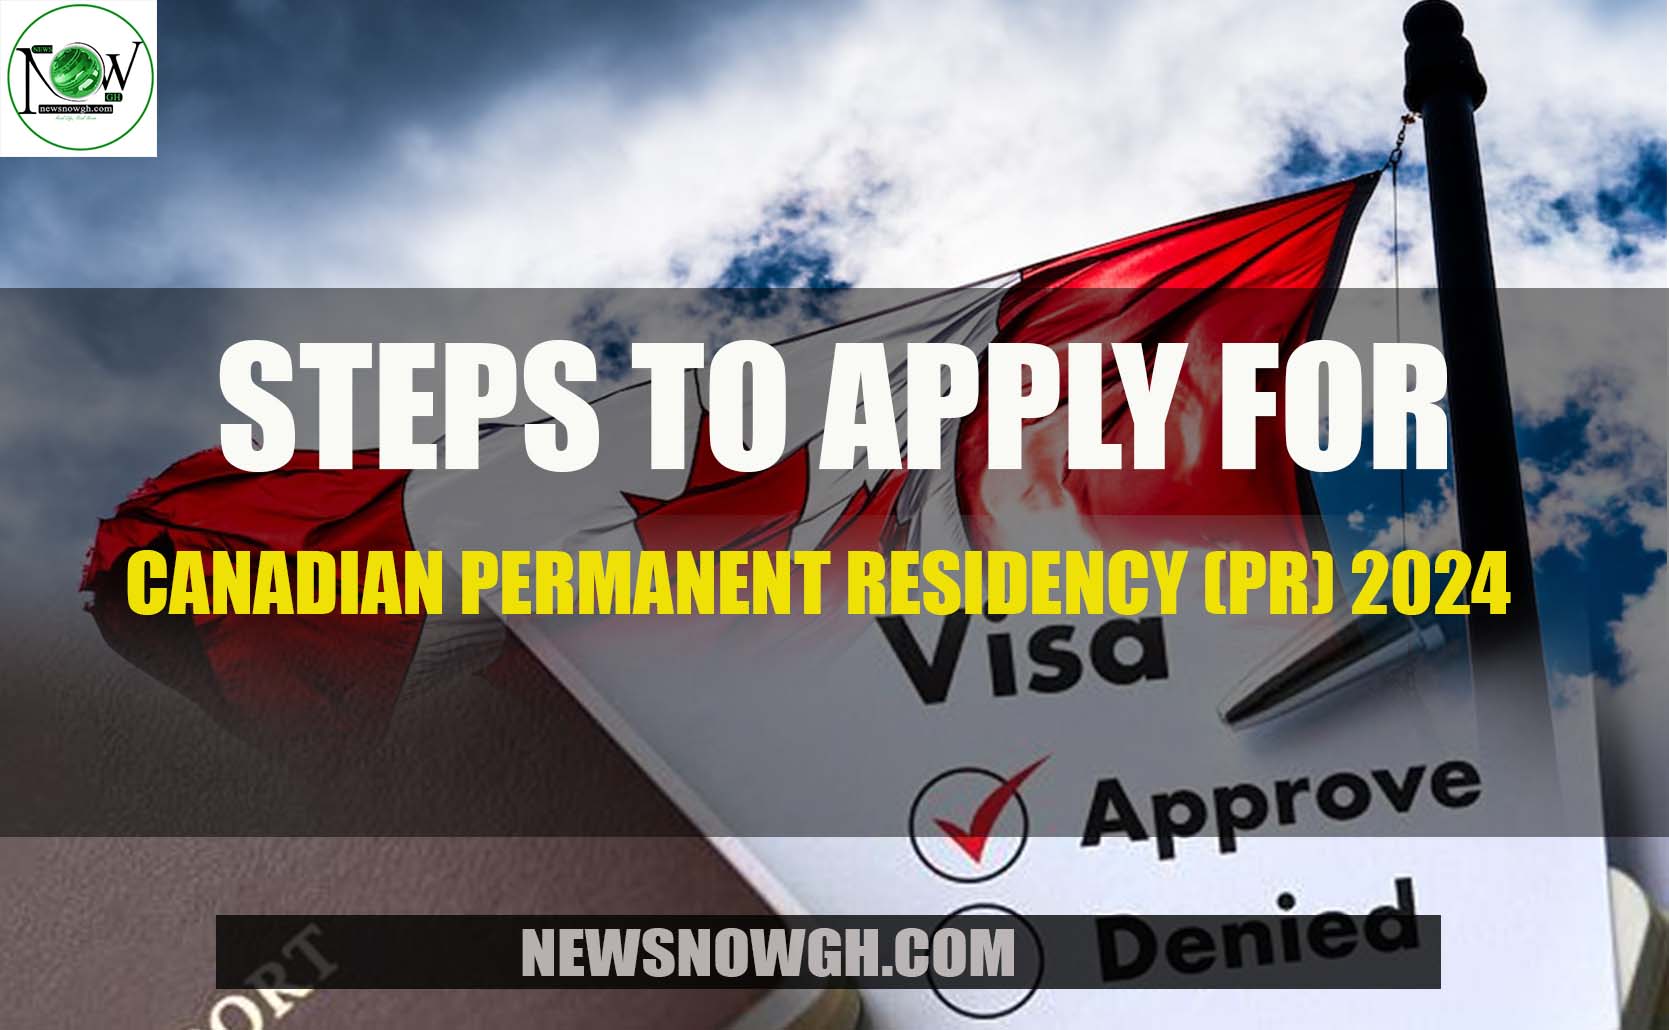 Steps to Apply for Canadian Permanent Residency (PR) 2024